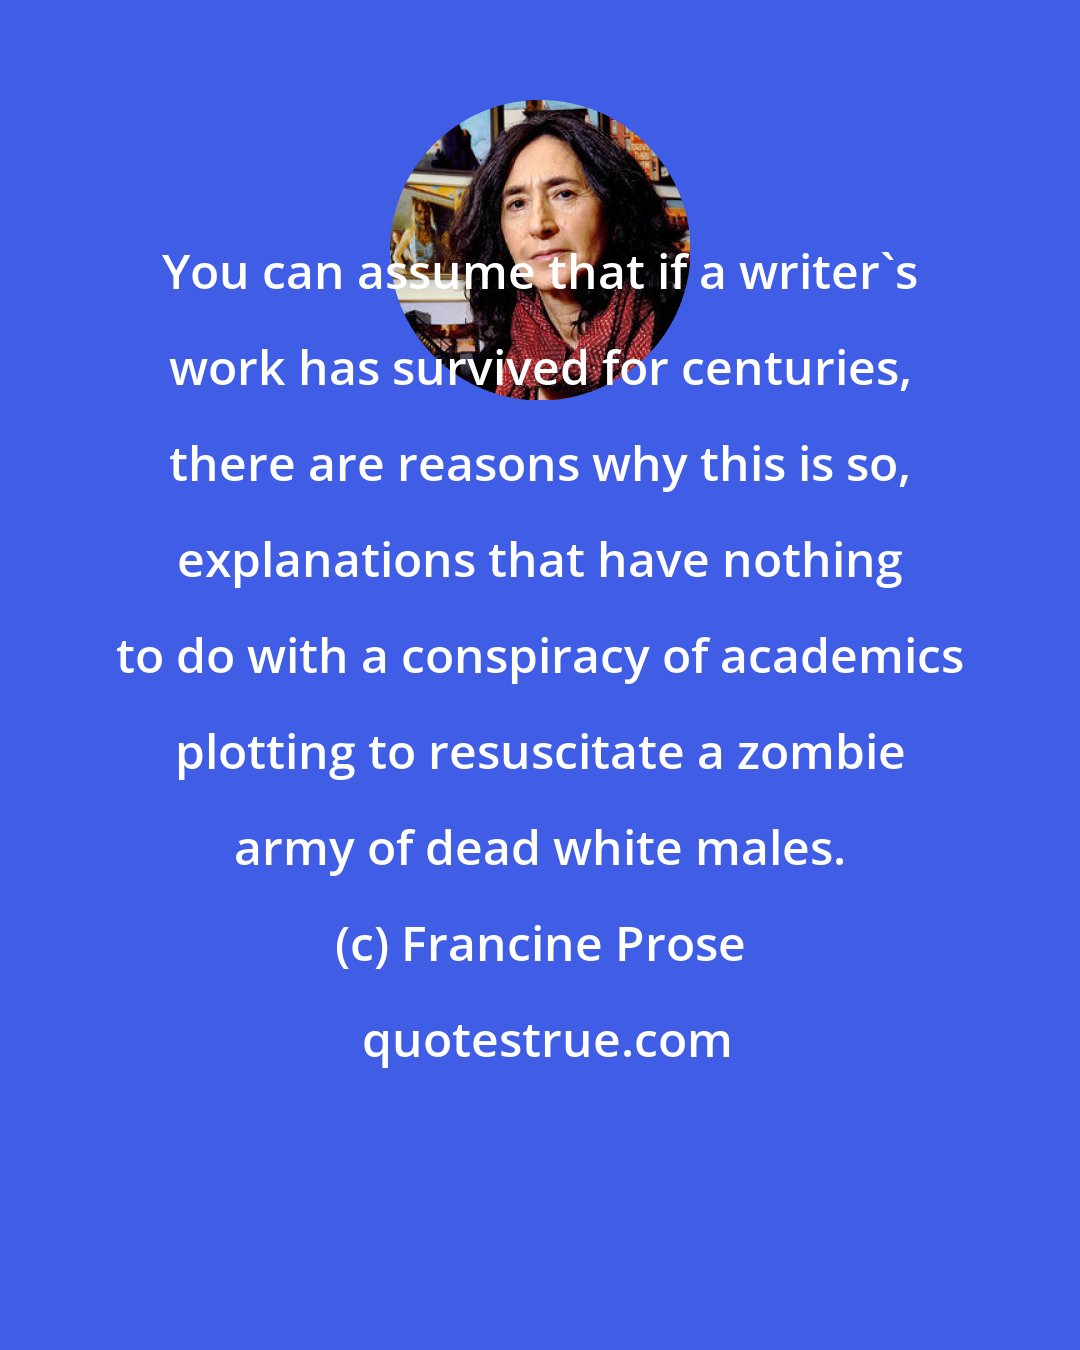 Francine Prose: You can assume that if a writer's work has survived for centuries, there are reasons why this is so, explanations that have nothing to do with a conspiracy of academics plotting to resuscitate a zombie army of dead white males.